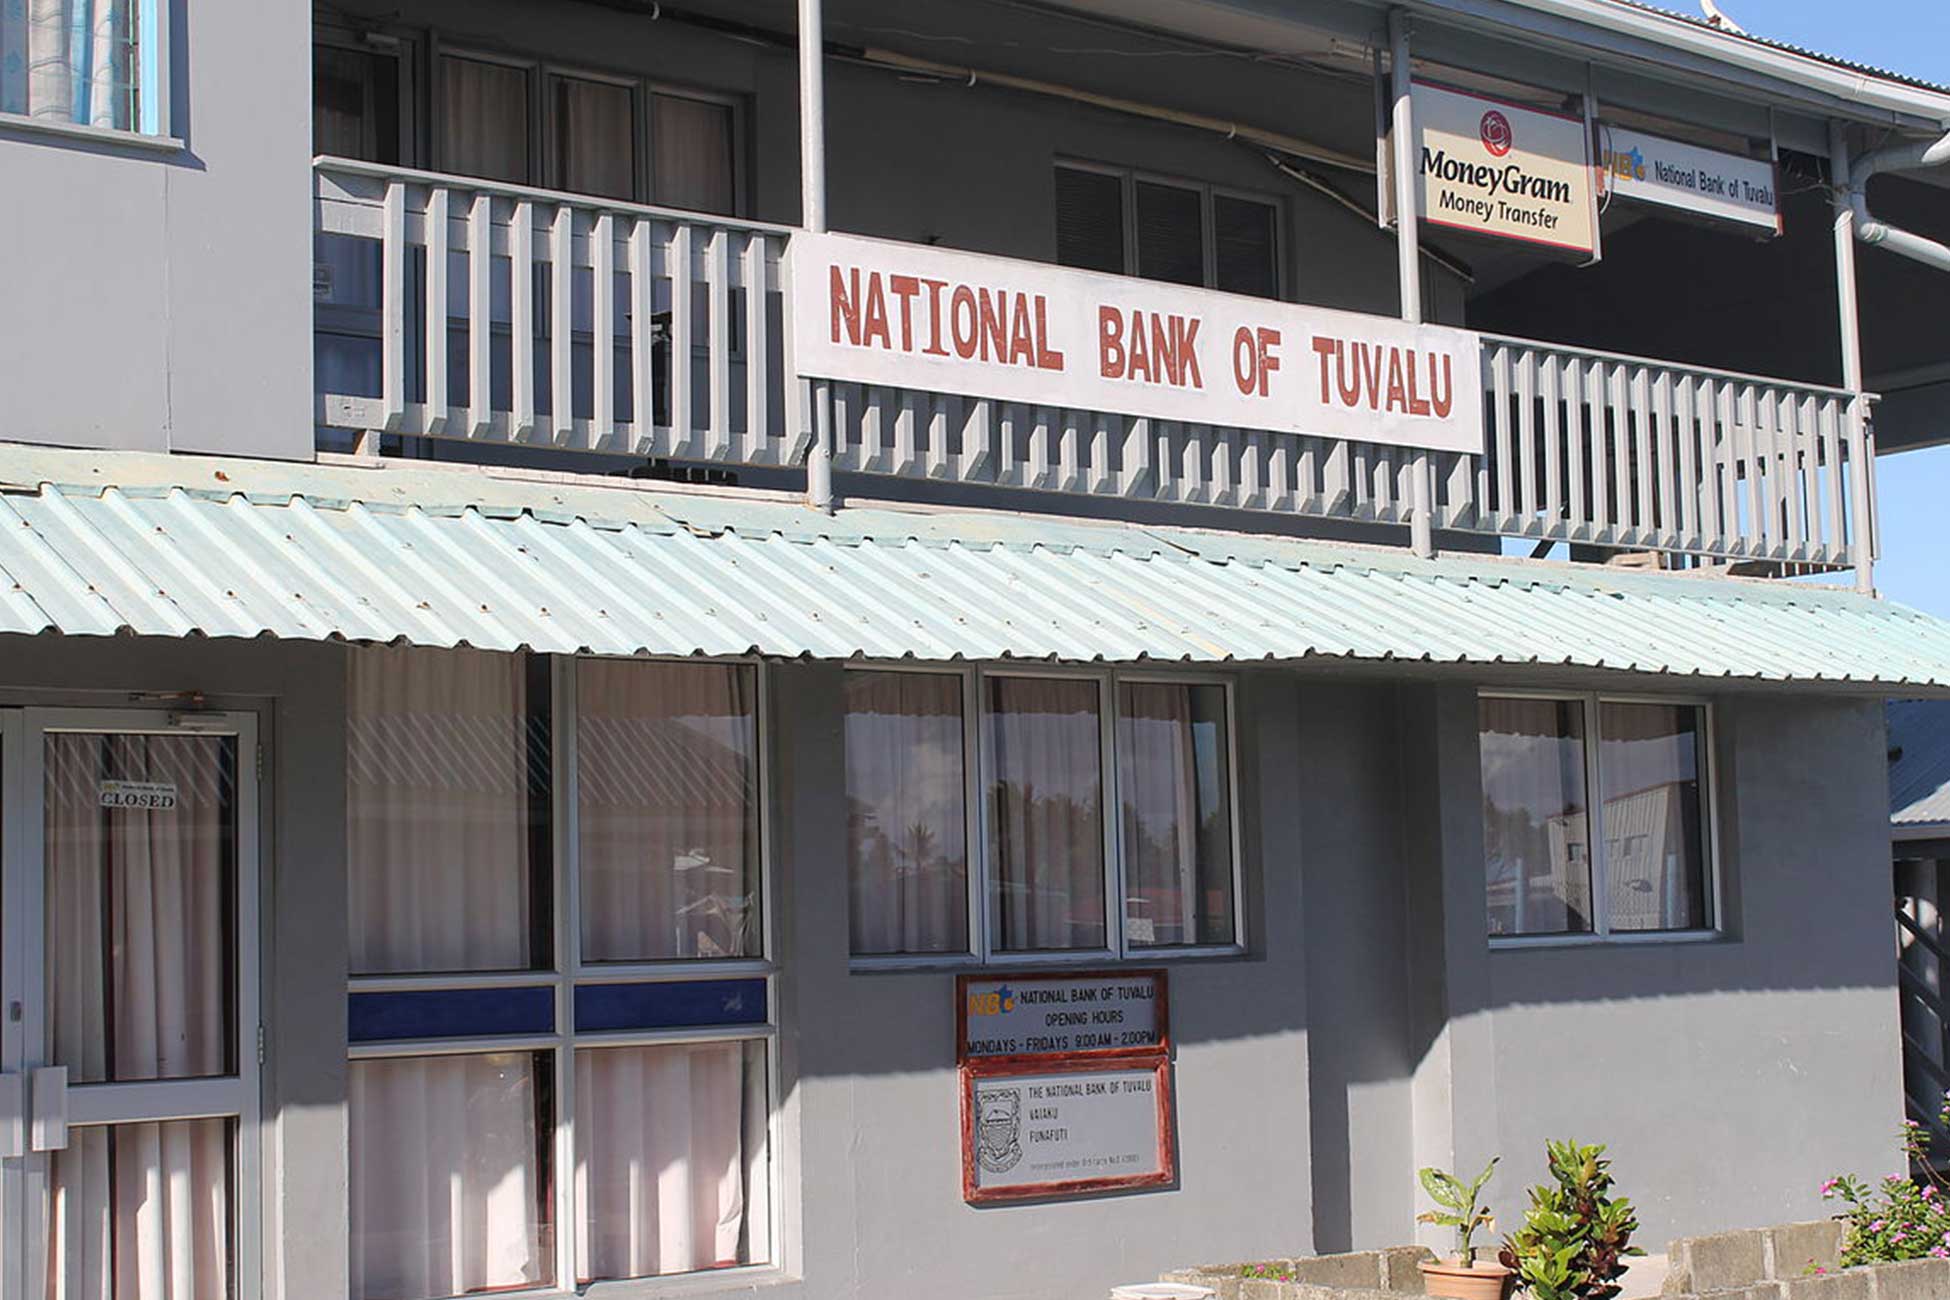 Open a bank account in Tuvalu